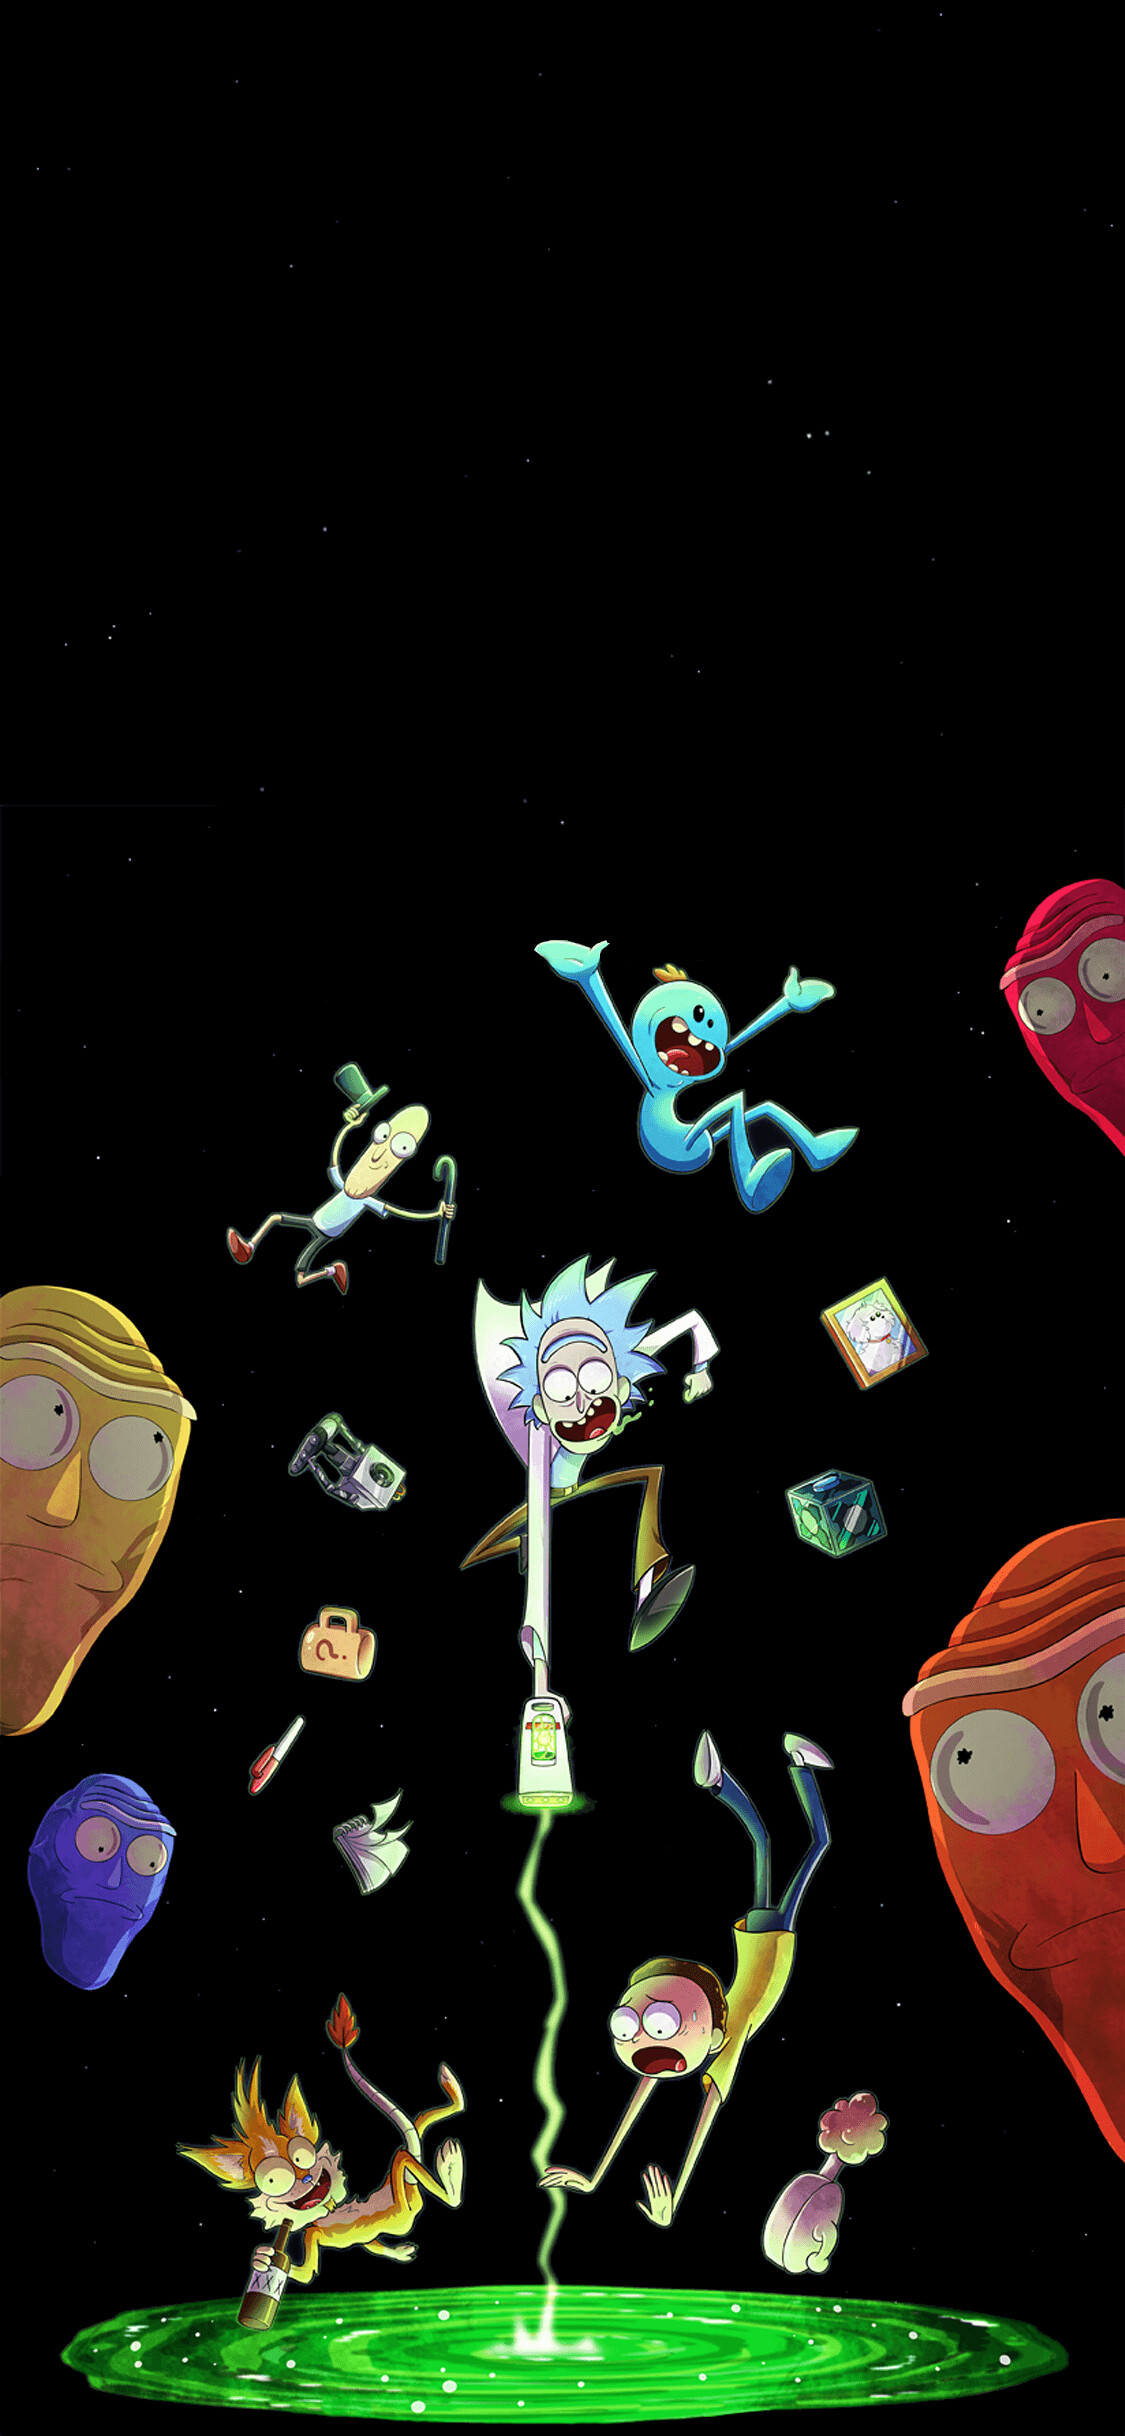 Rick and Morty: Won the Best Animated Series award at IGN Awards 2015. 1130x2440 HD Background.